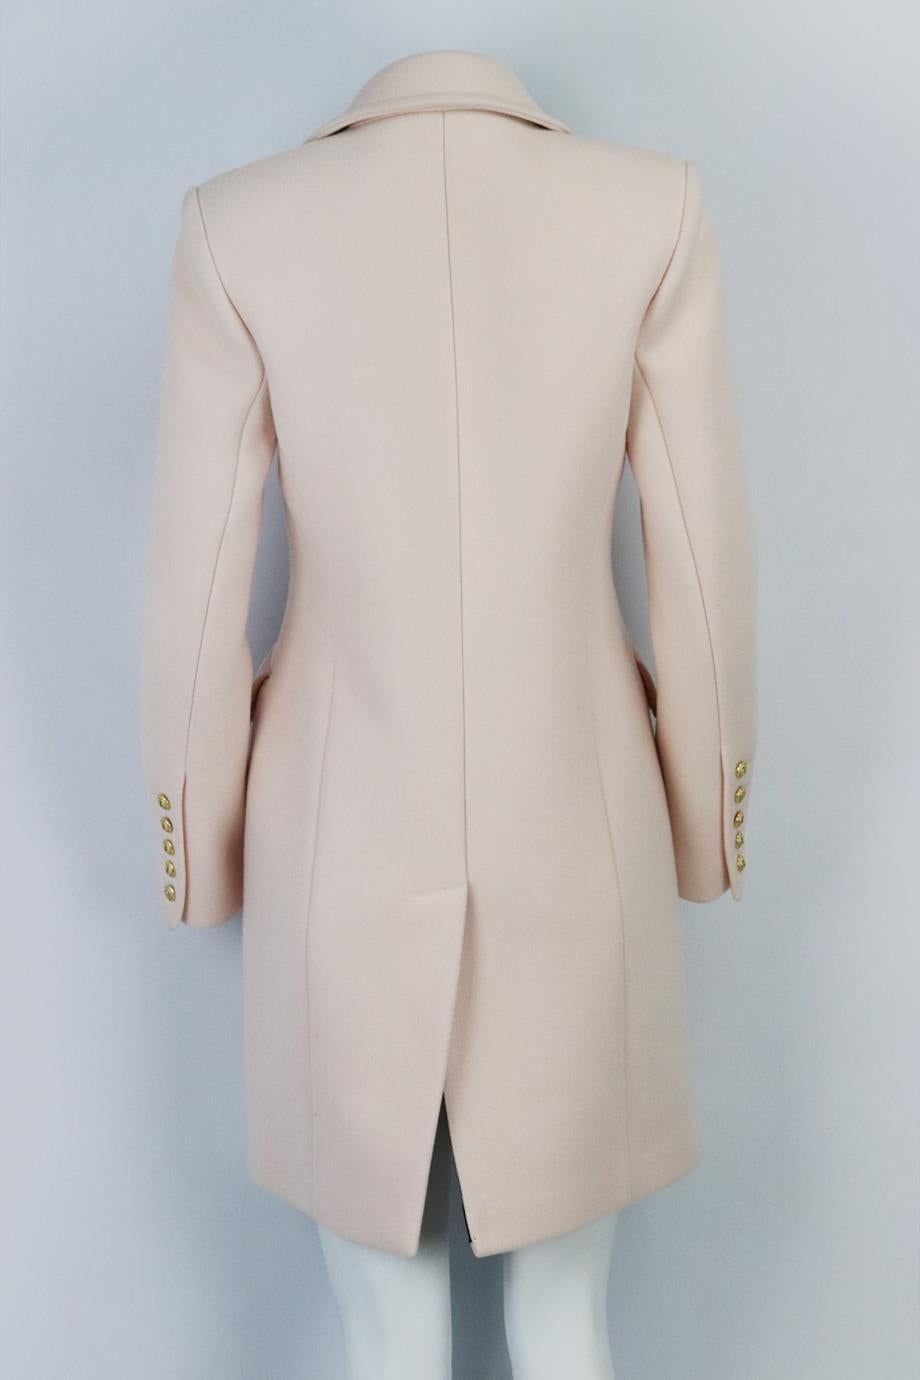 Balmain Button Embellished Wool And Cashmere Blend Coat Fr 42 Uk 14 In Excellent Condition In London, GB